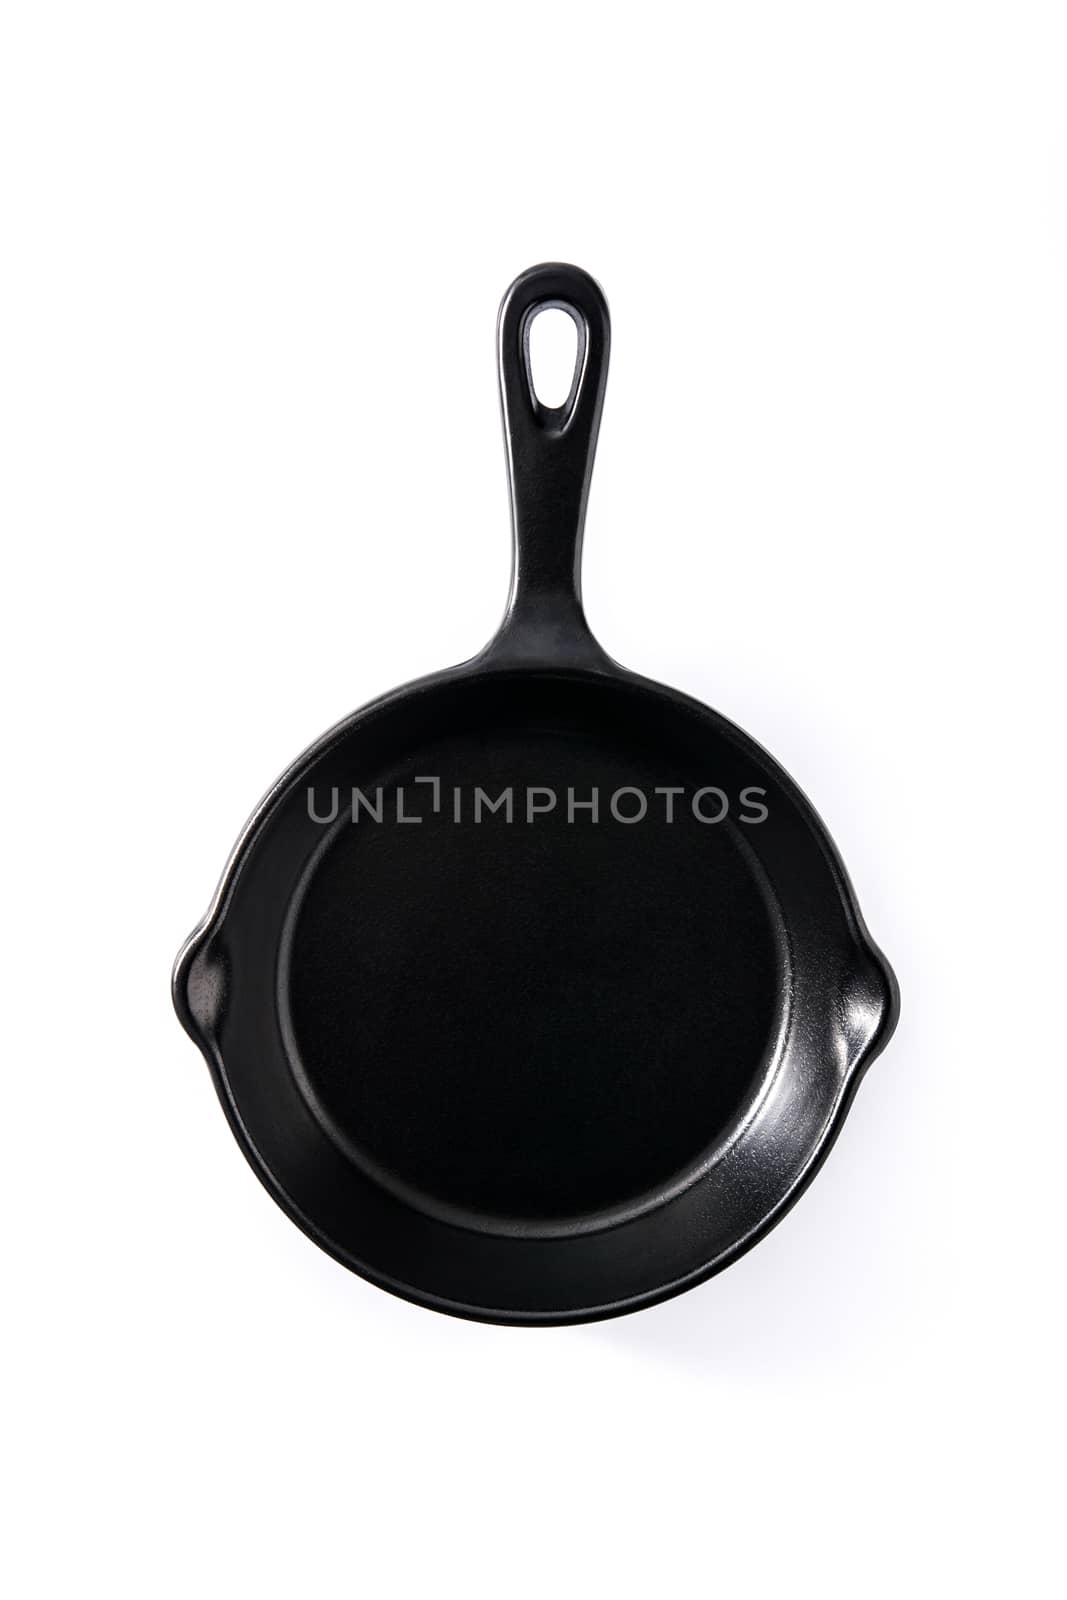 Empty black frying pan by chandlervid85